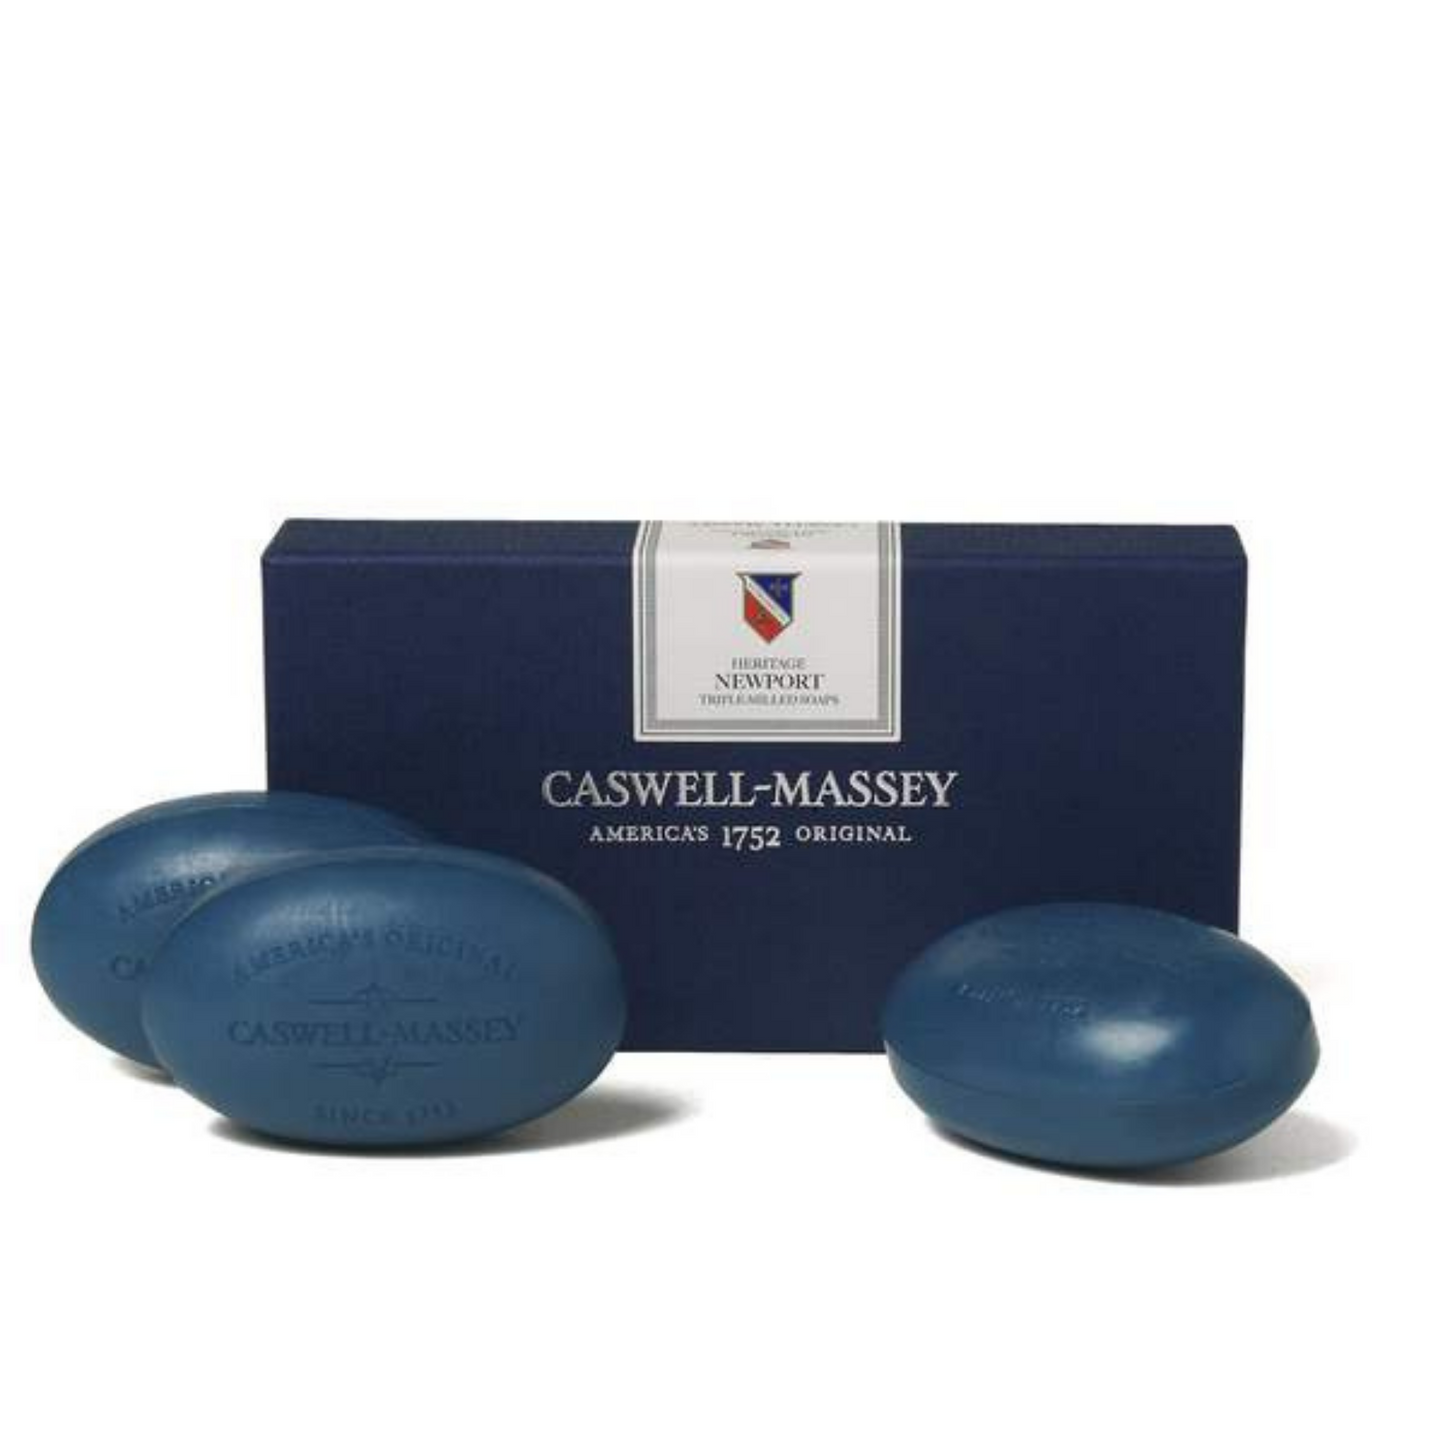 Primary image of Newport 3 Bar Soap Set